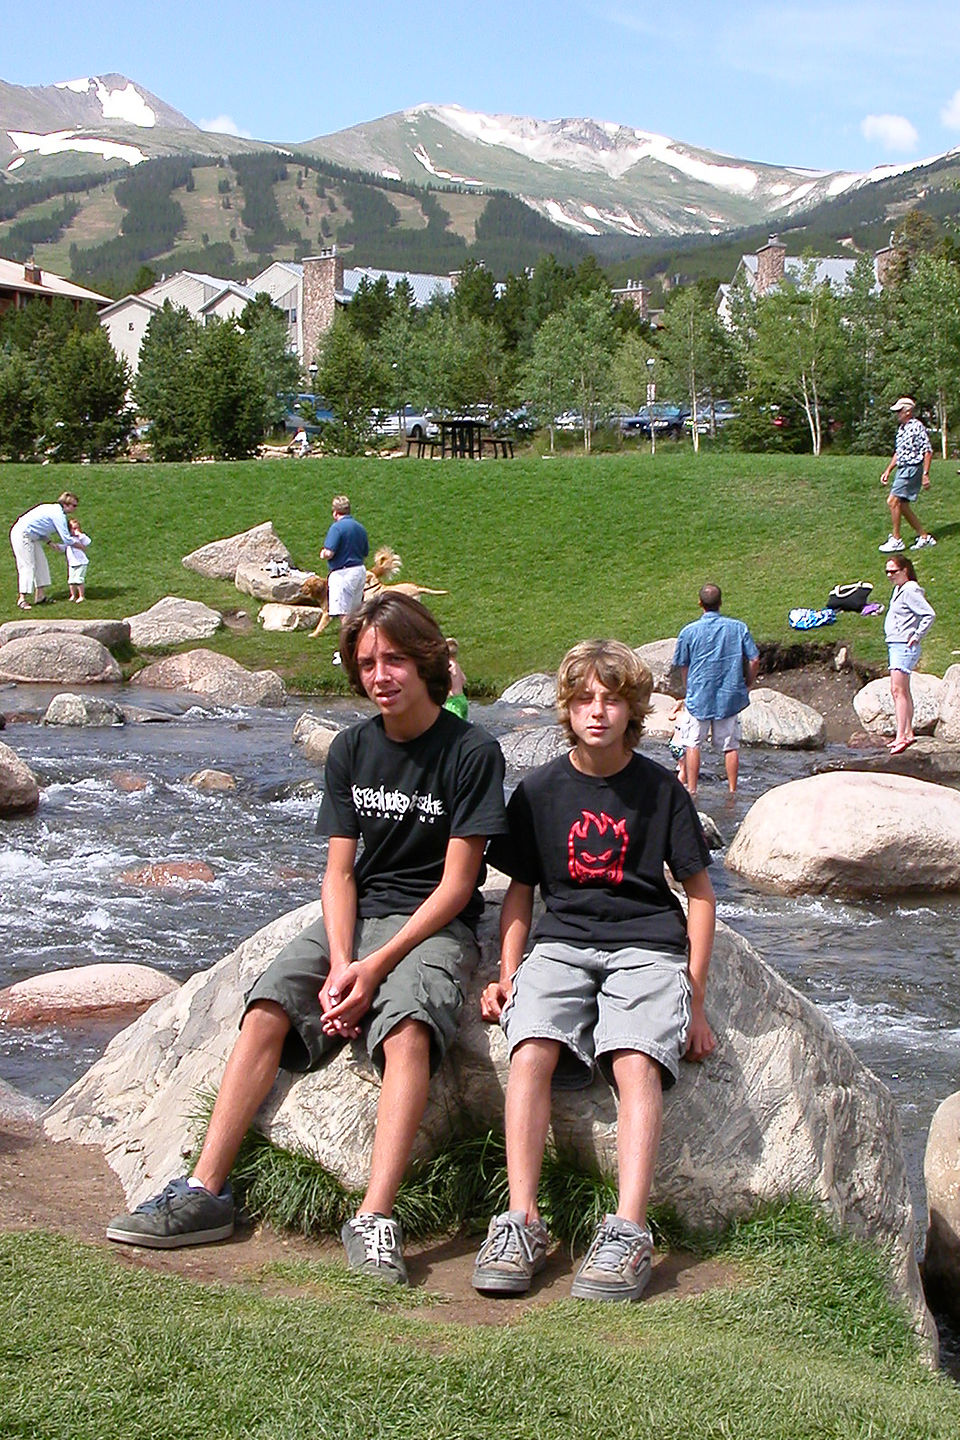 Boys by the Blue River